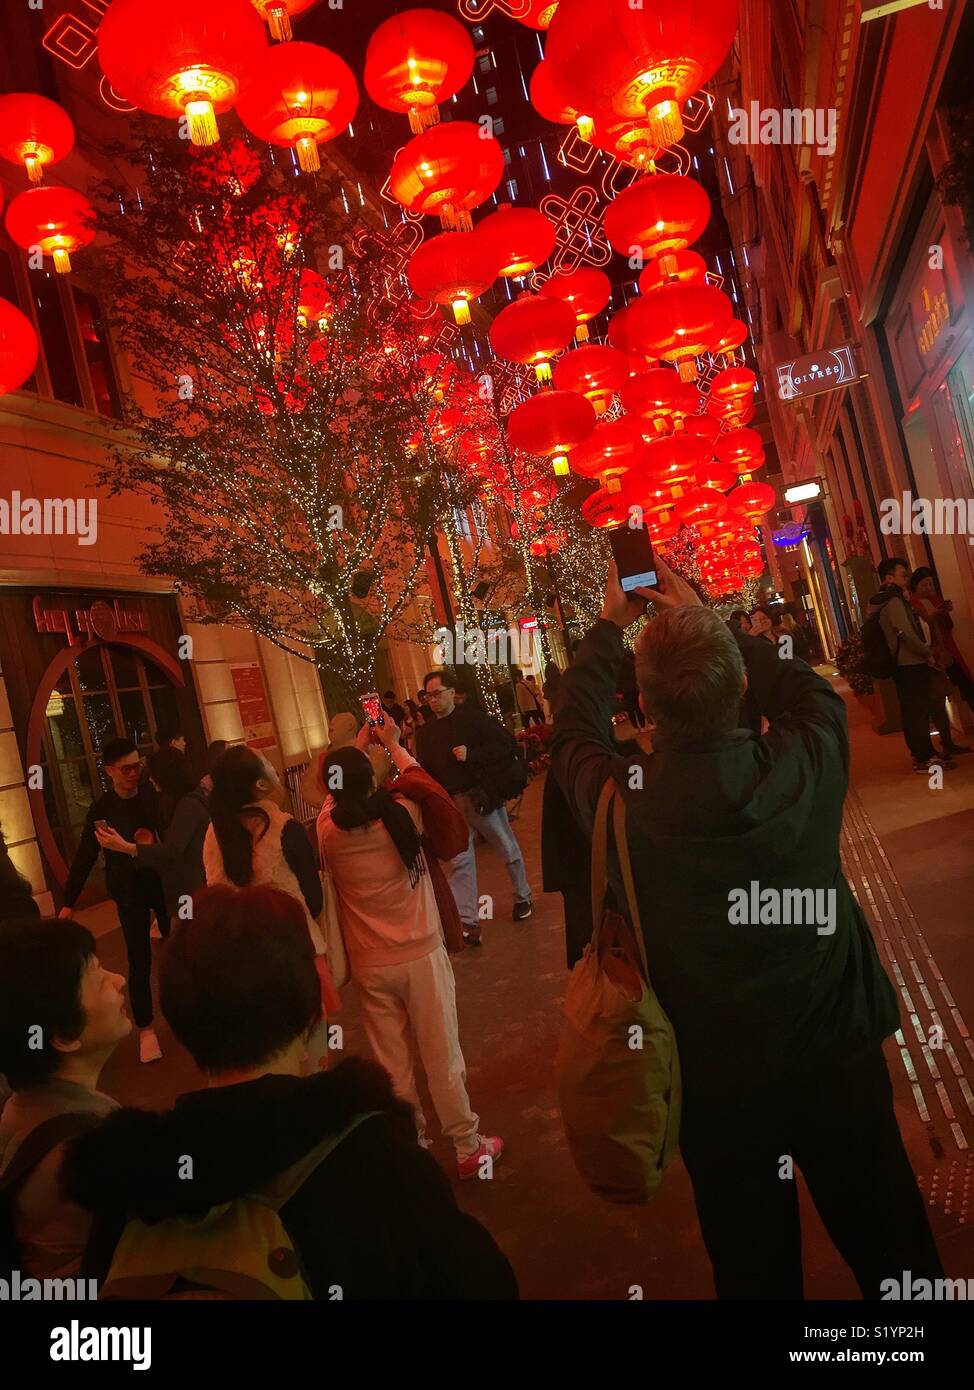 Red lanterns, traditional decorations for Chinese New Year, in Lee Tung Avenue, a shopping mall opened in 2015 on the site of old Lee Tung Street (‘Wedding Card Street’) in Wan Chai, Hong Kong Stock Photo